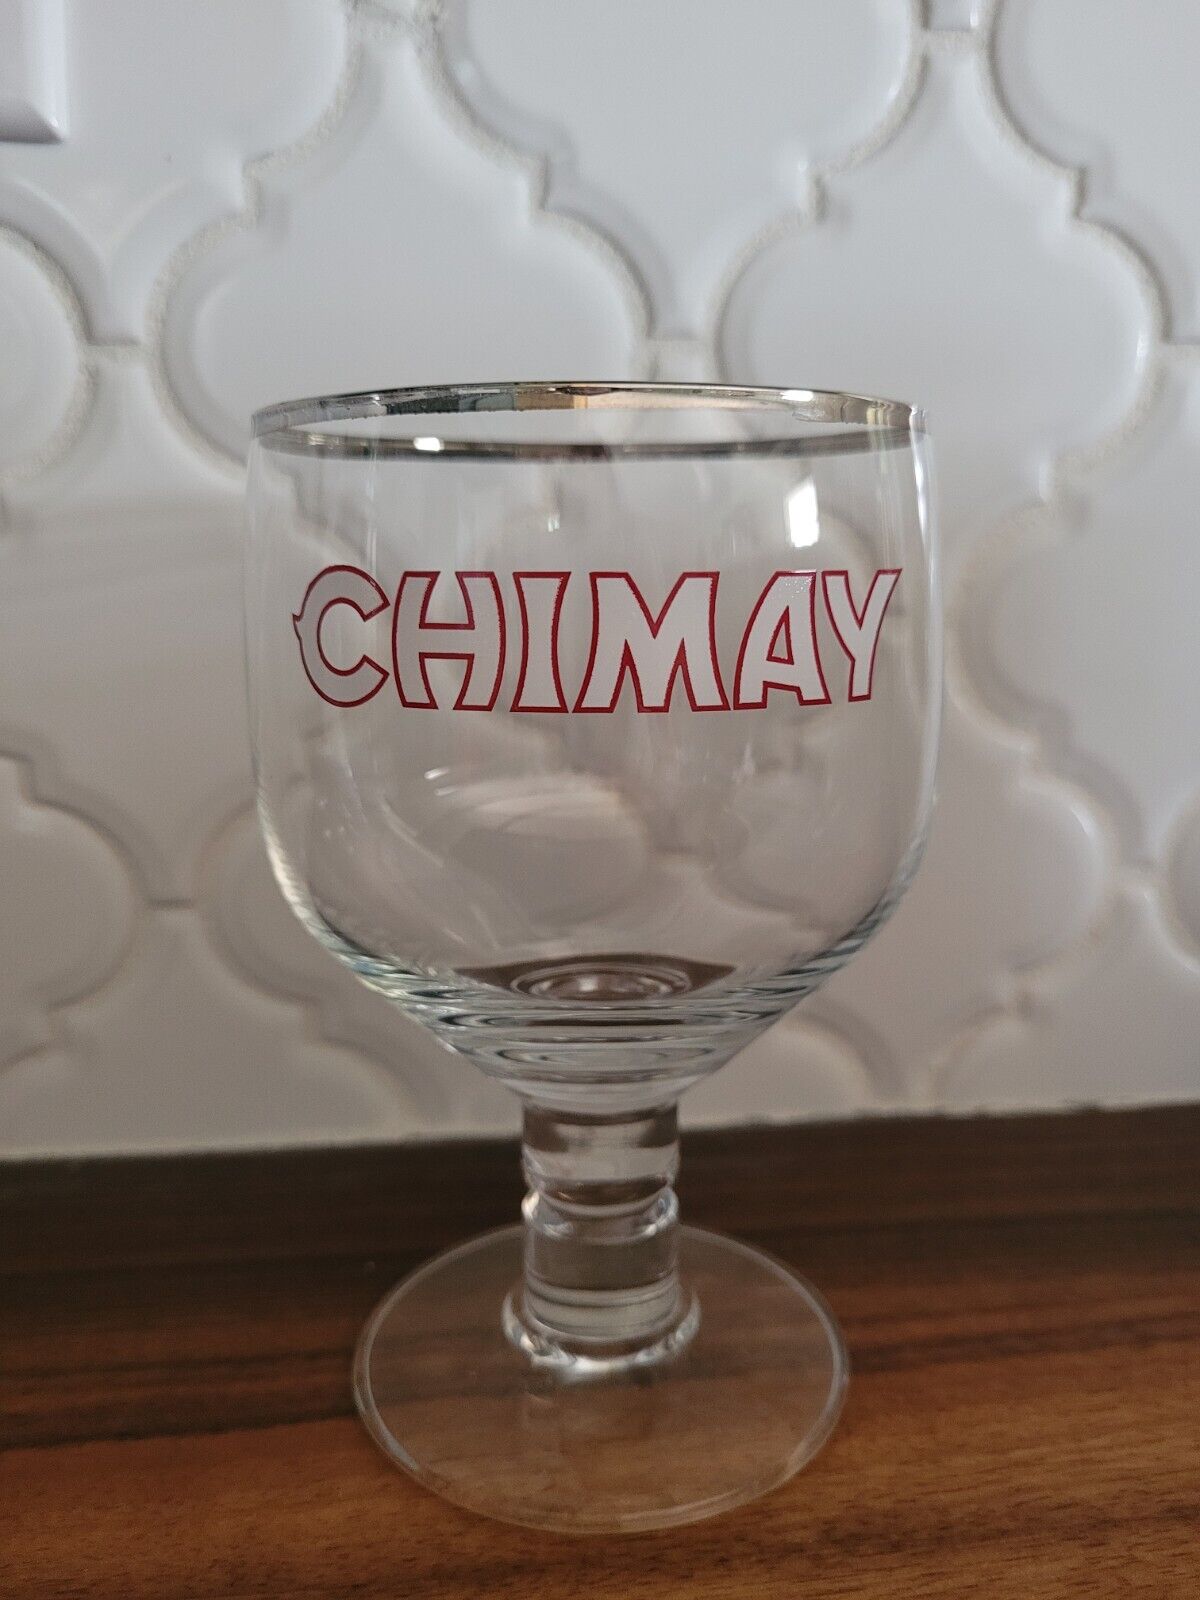 Chimay Peres Trappistes Chalice Glasses 33cl./11.2 oz. Set Of 6 In Original Box